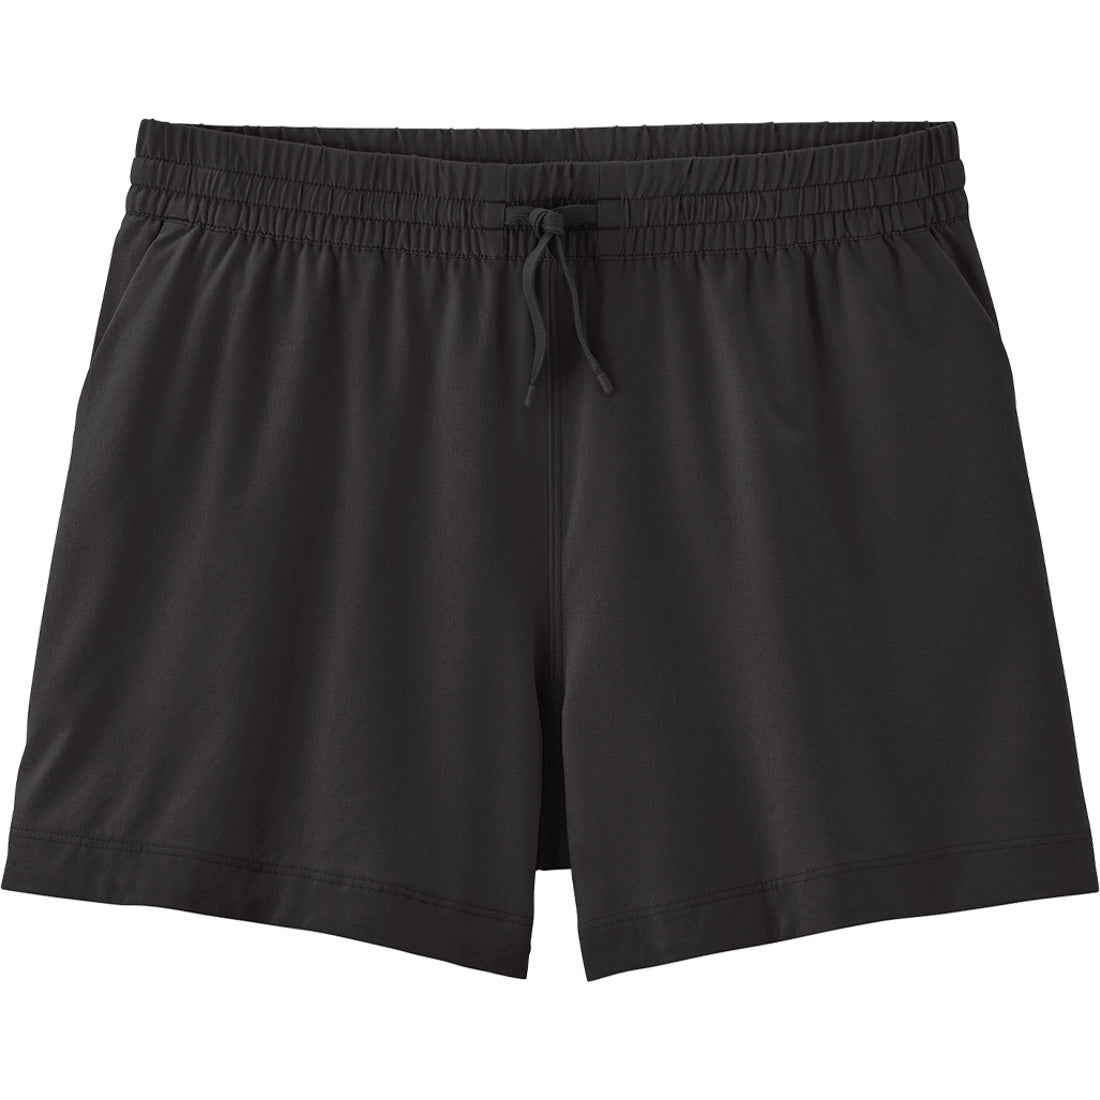 Patagonia Fleetwith Short (Discontinued) - Women's